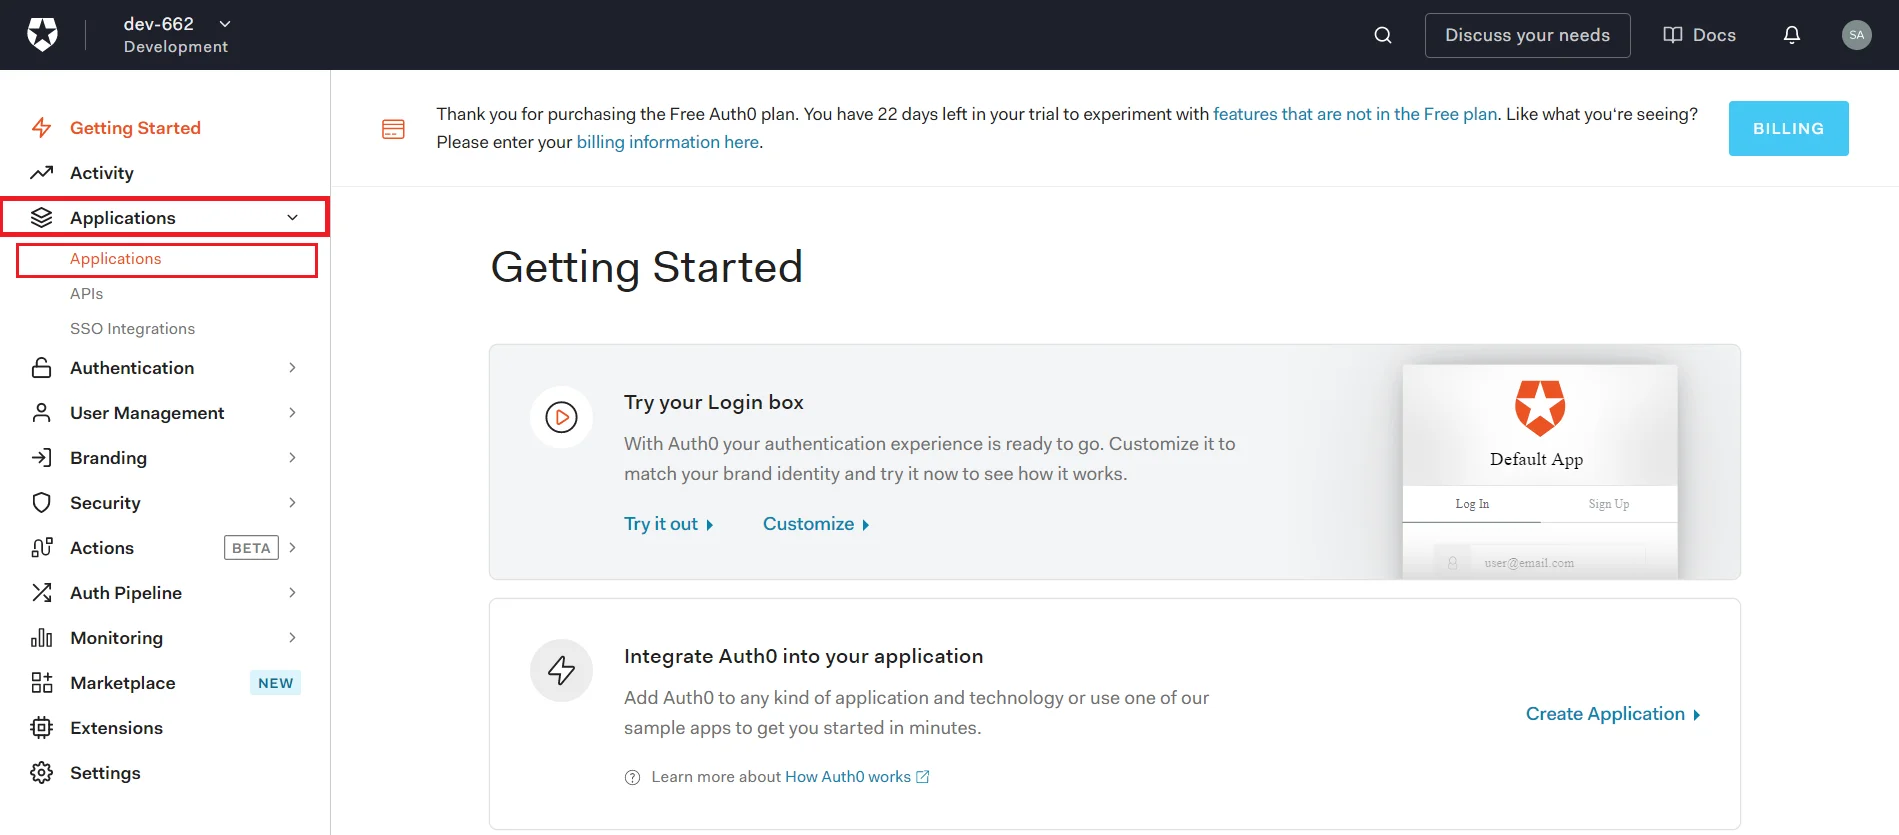 OAuth/OpenID/OIDC Single Sign-On (SSO),Auth0 SSO Login go to applications